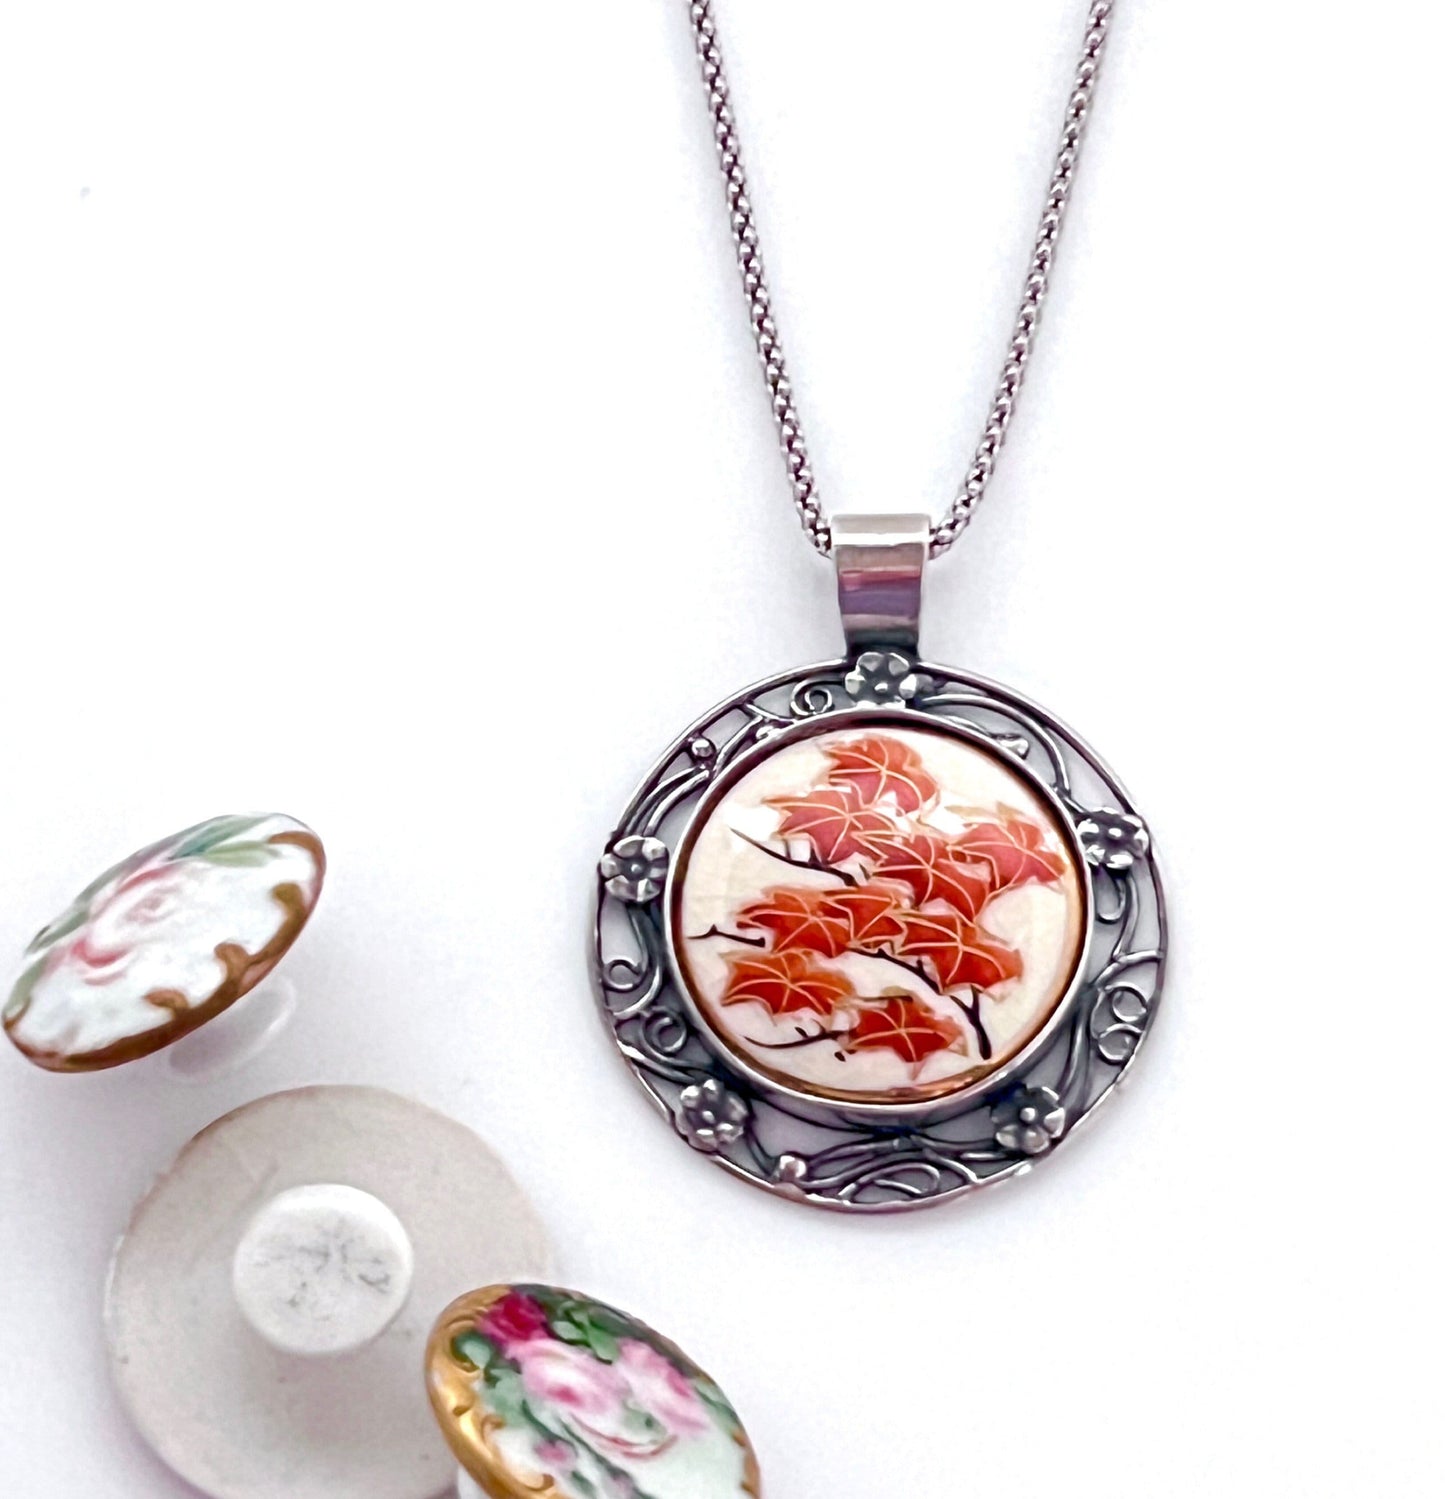 Japanese Satsuma Button Necklace, Antique Hand Painted Button, 18th or 20th Anniversary Gift for Wife